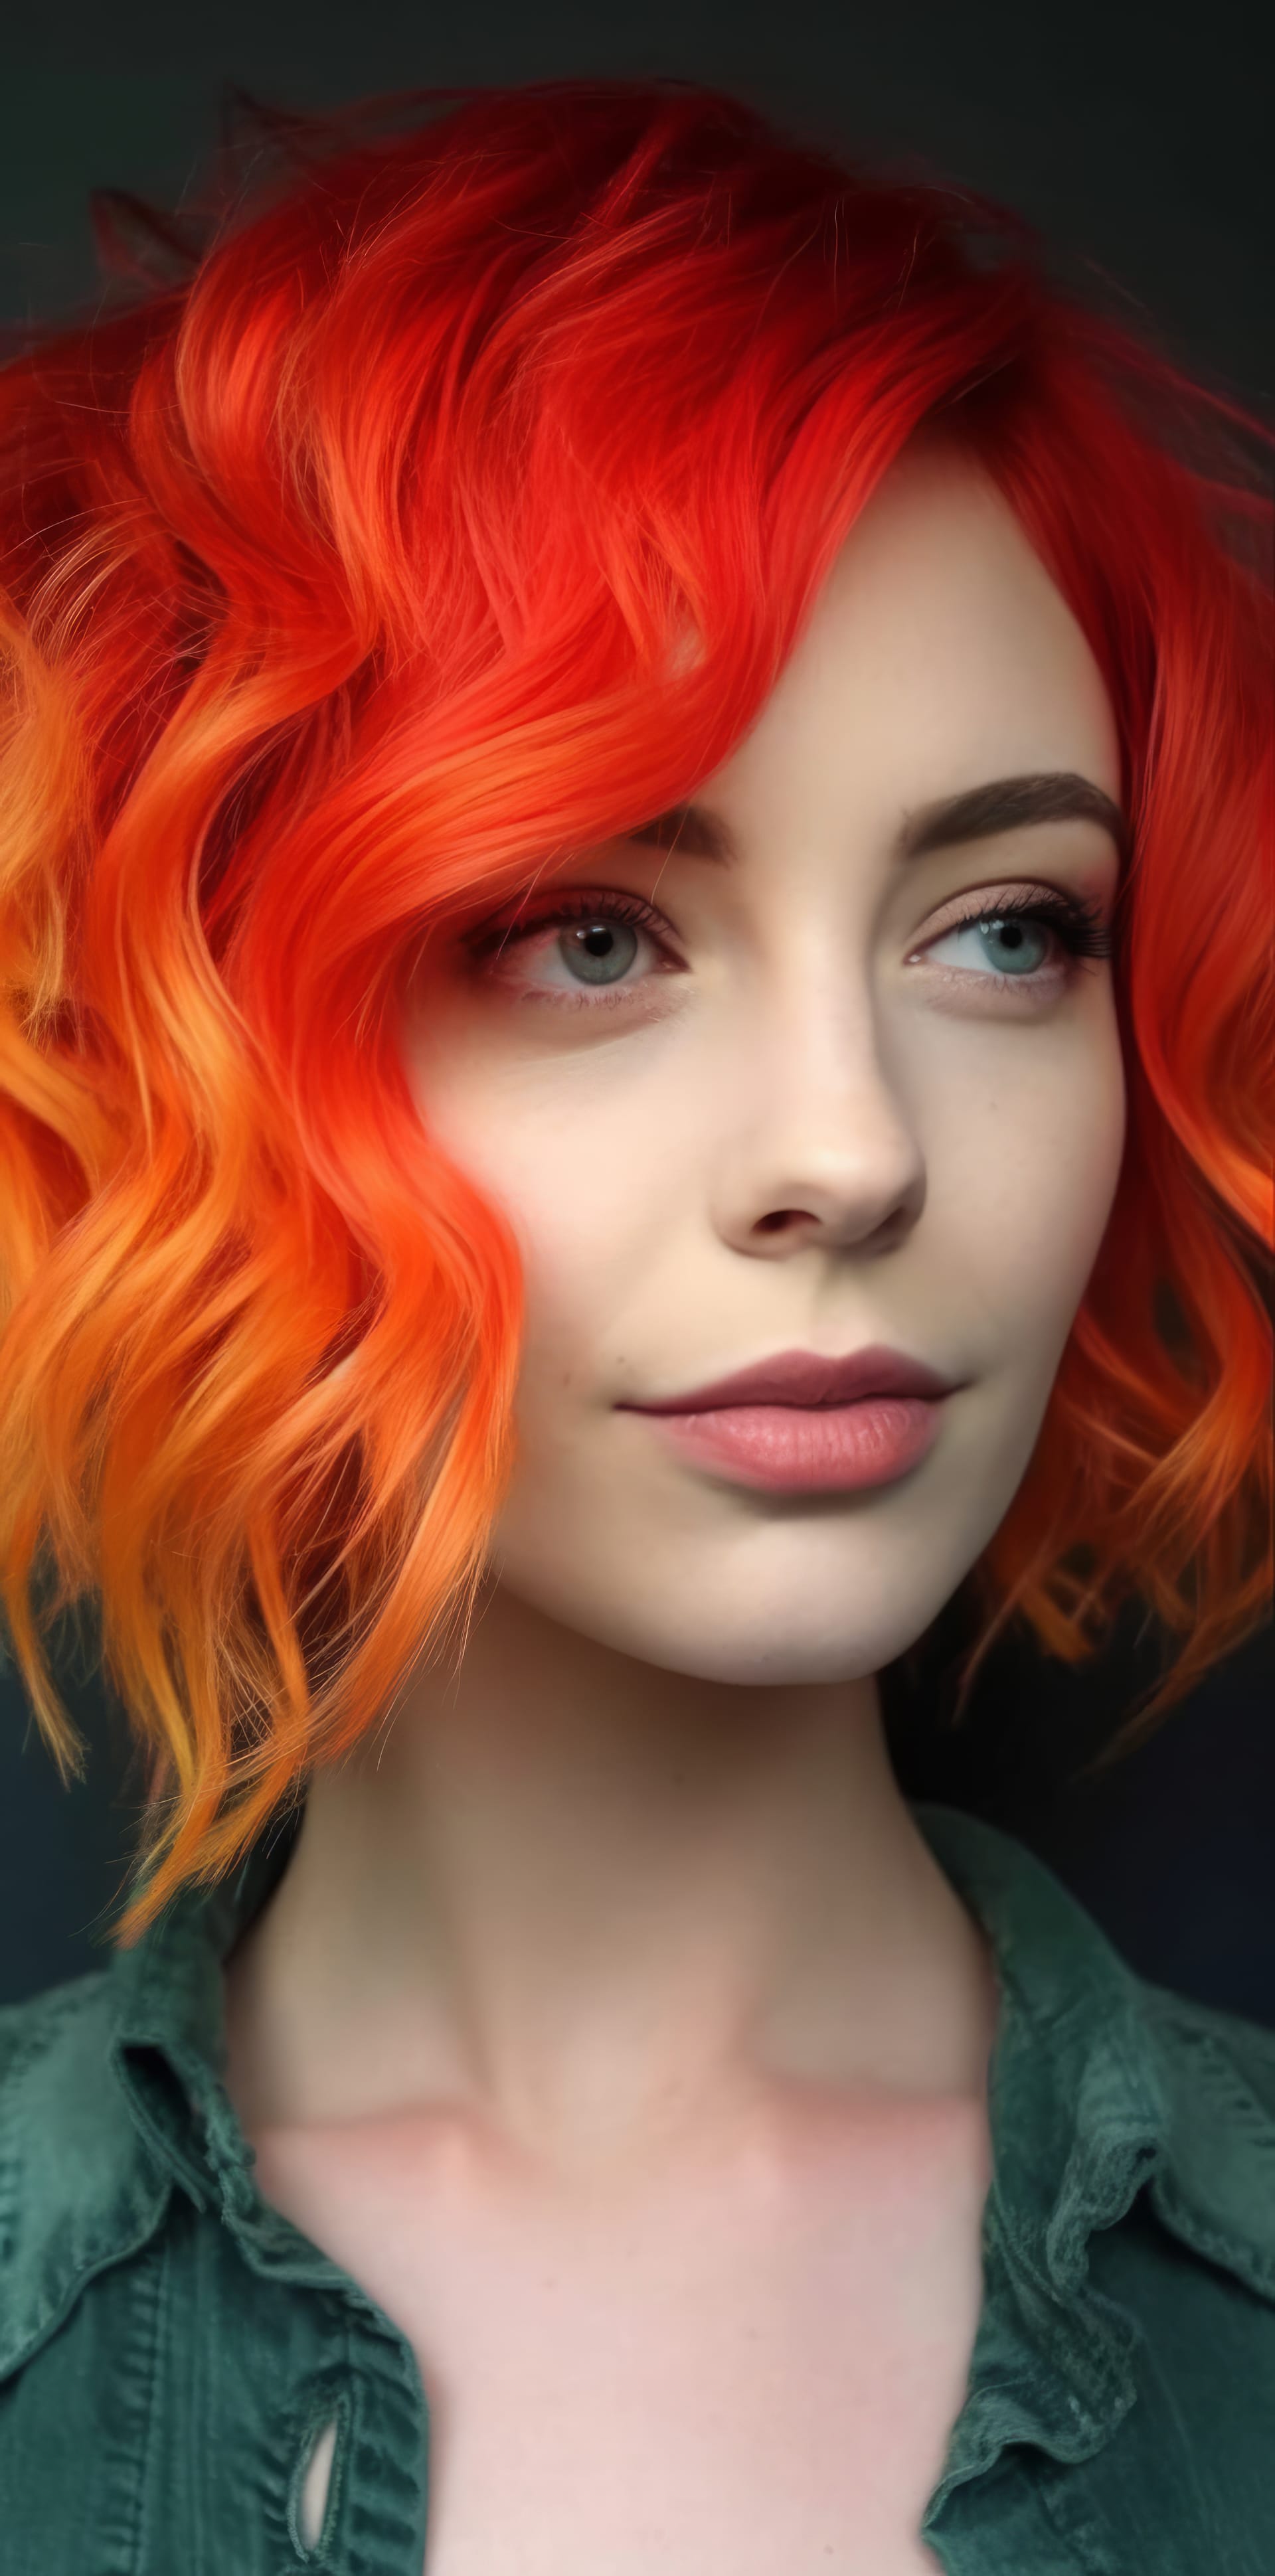 Best instagram profile pictures girl with orange hair